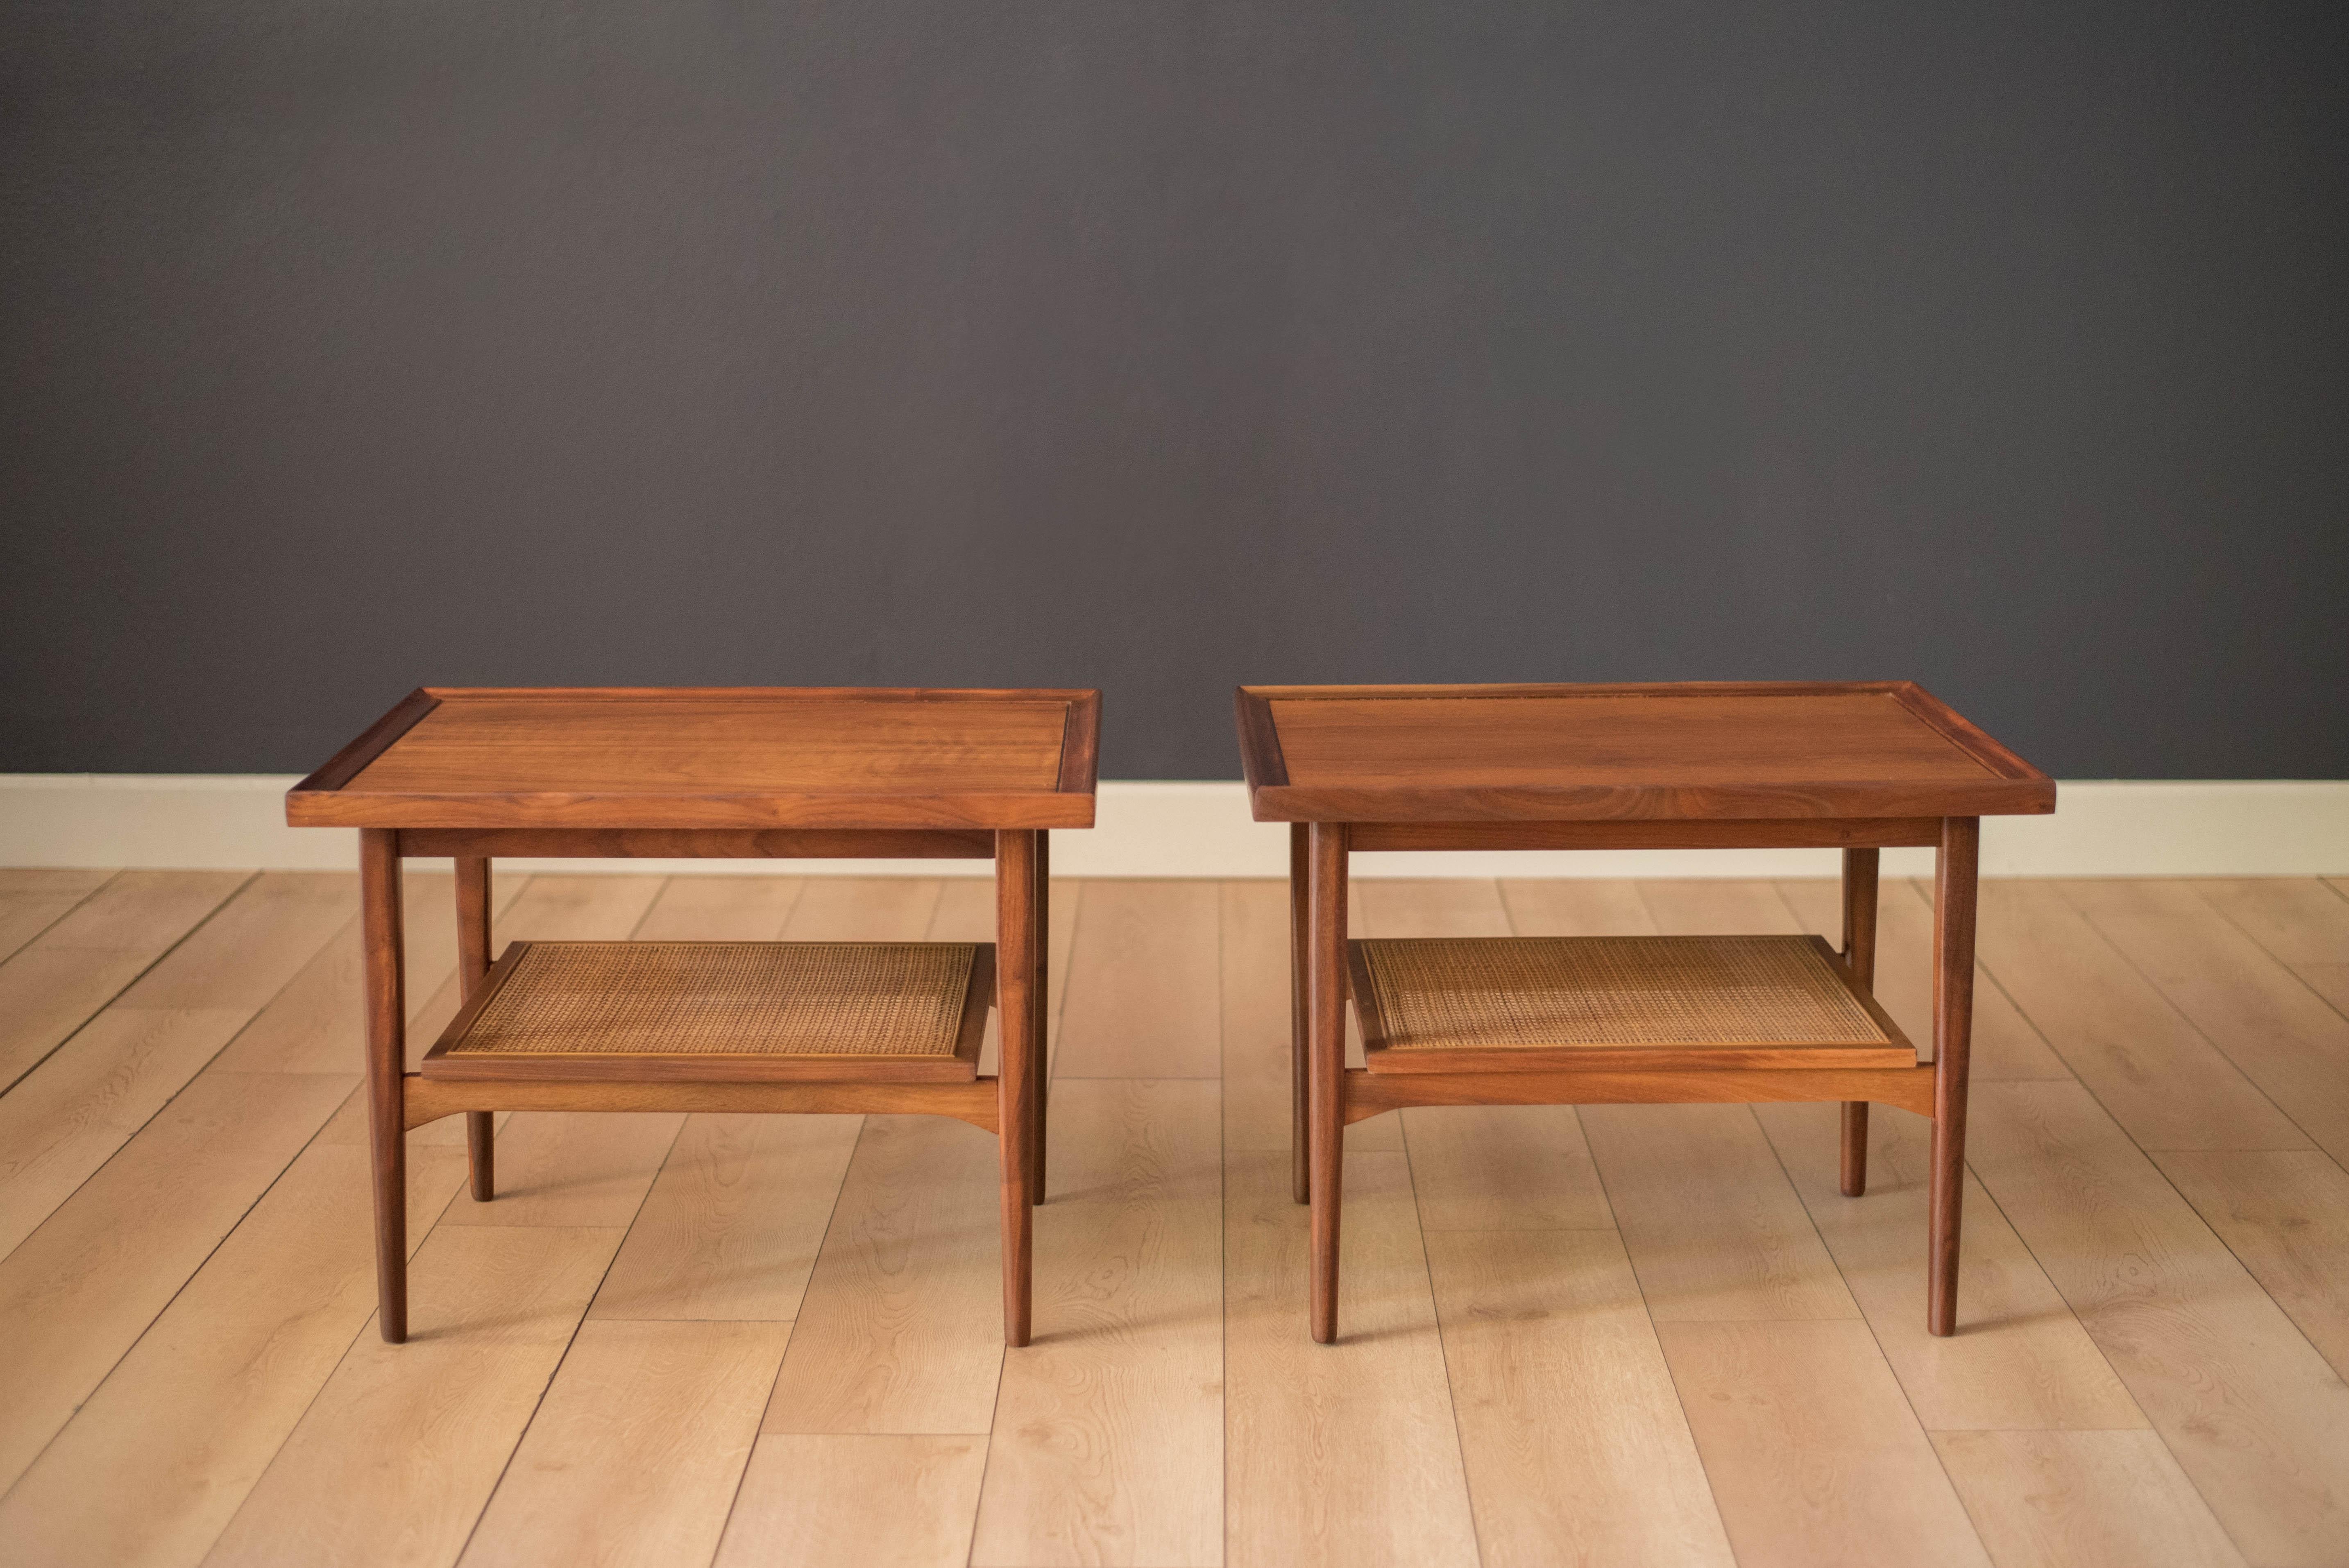 Vintage set of walnut side tables from the Declaration collection designed by Kipp Stewart & Stewart McDougall for Drexel Furniture Co. This pair features a raised edge table top supported by tapered legs. Offers a lower caned magazine shelf for